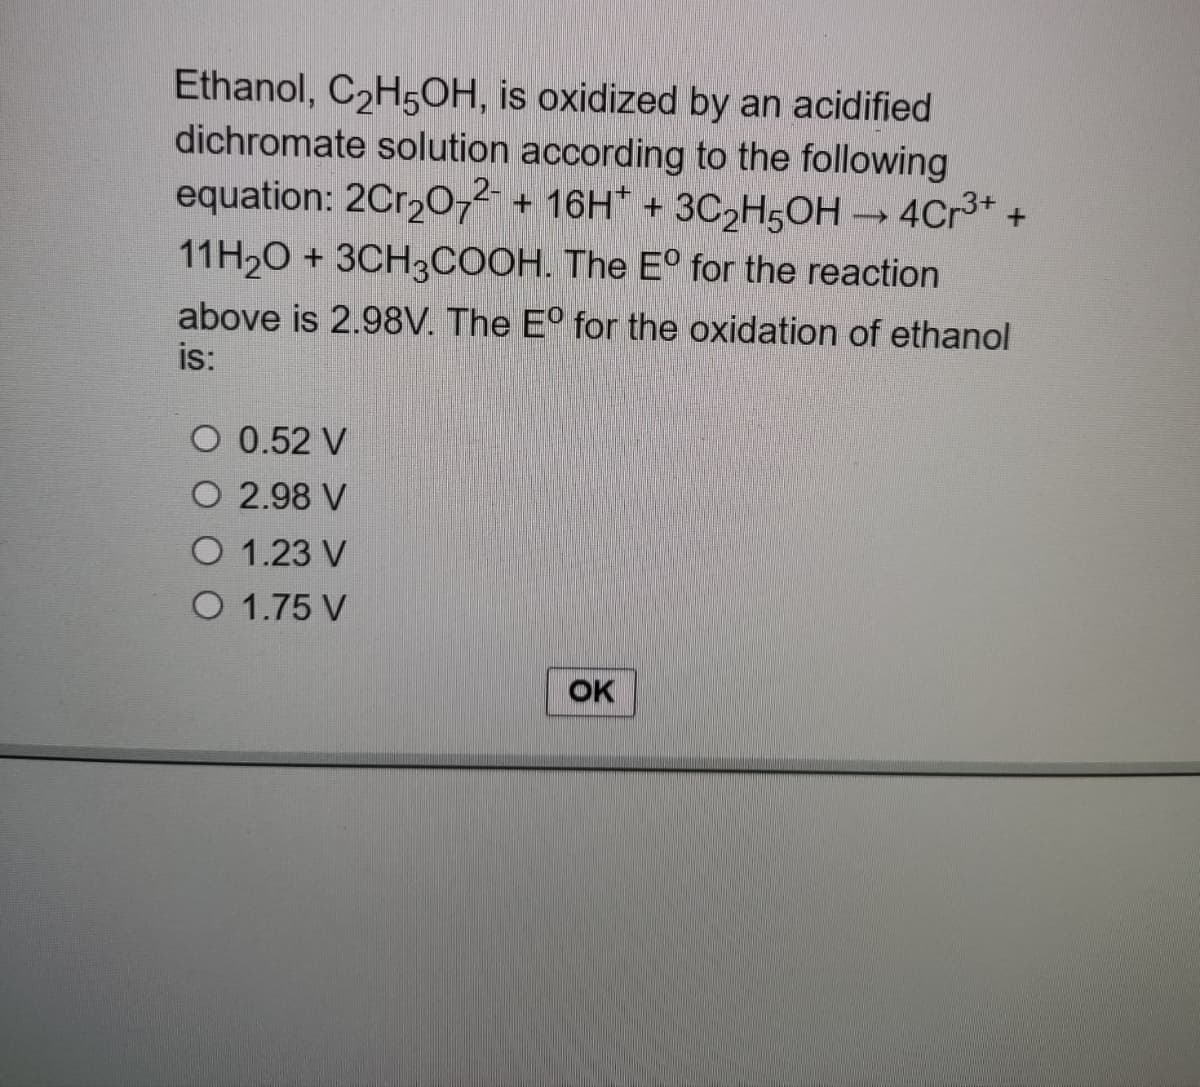 Ethanol, C₂H5OH, is oxidized by an acidified
dichromate solution according to the following
equation: 2Cr₂O72- + 16H+ + 3C₂H5OH → 4Cr³+ +
11H₂O + 3CH3COOH. The Eº for the reaction
above is 2.98V. The Eº for the oxidation of ethanol
is:
O 0.52 V
O 2.98 V
O 1.23 V
O 1.75 V
OK